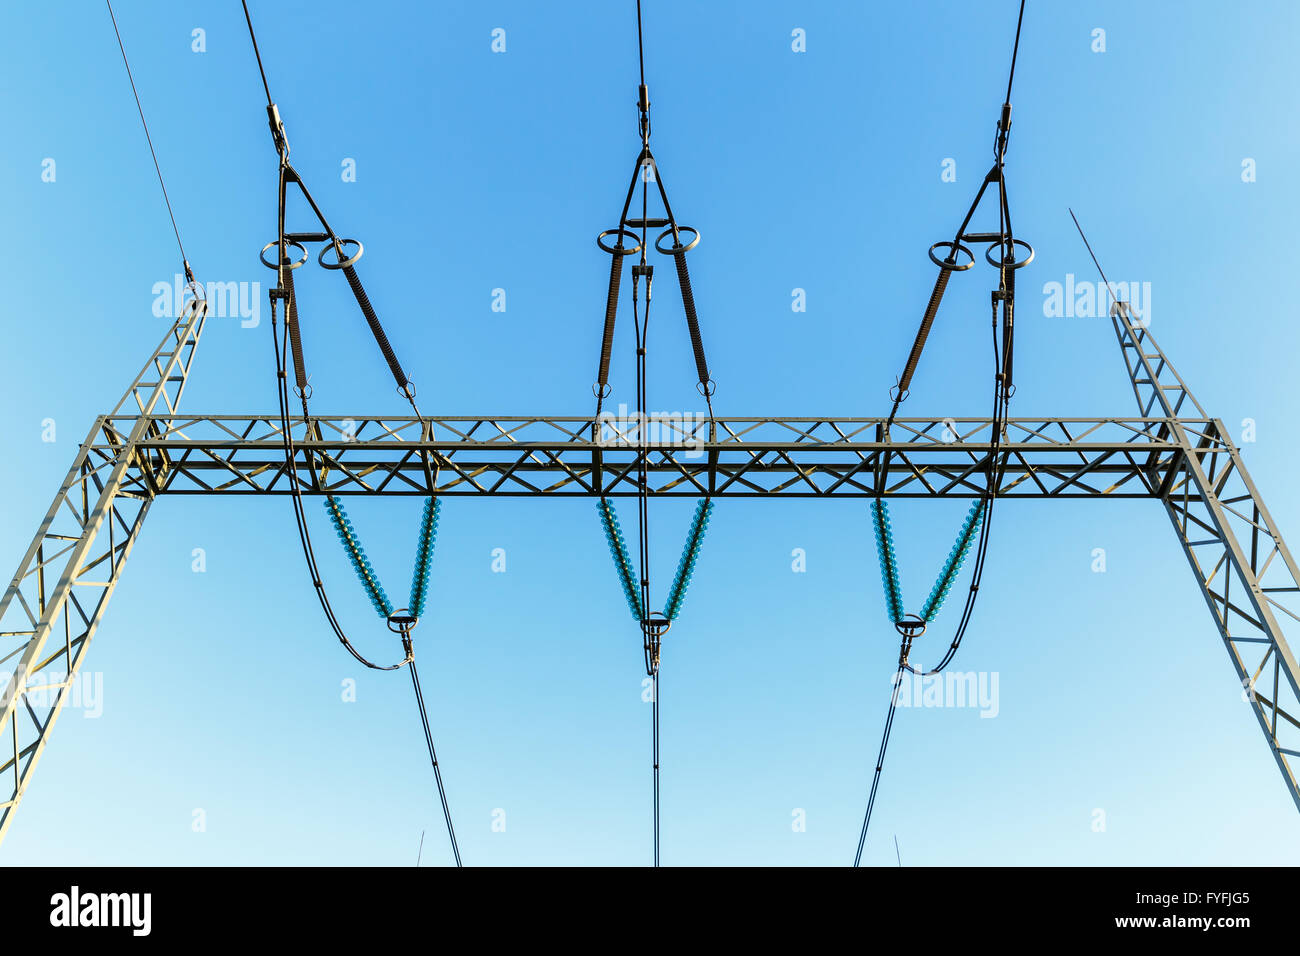 high-voltage electricity pylons against blue sky Stock Photo